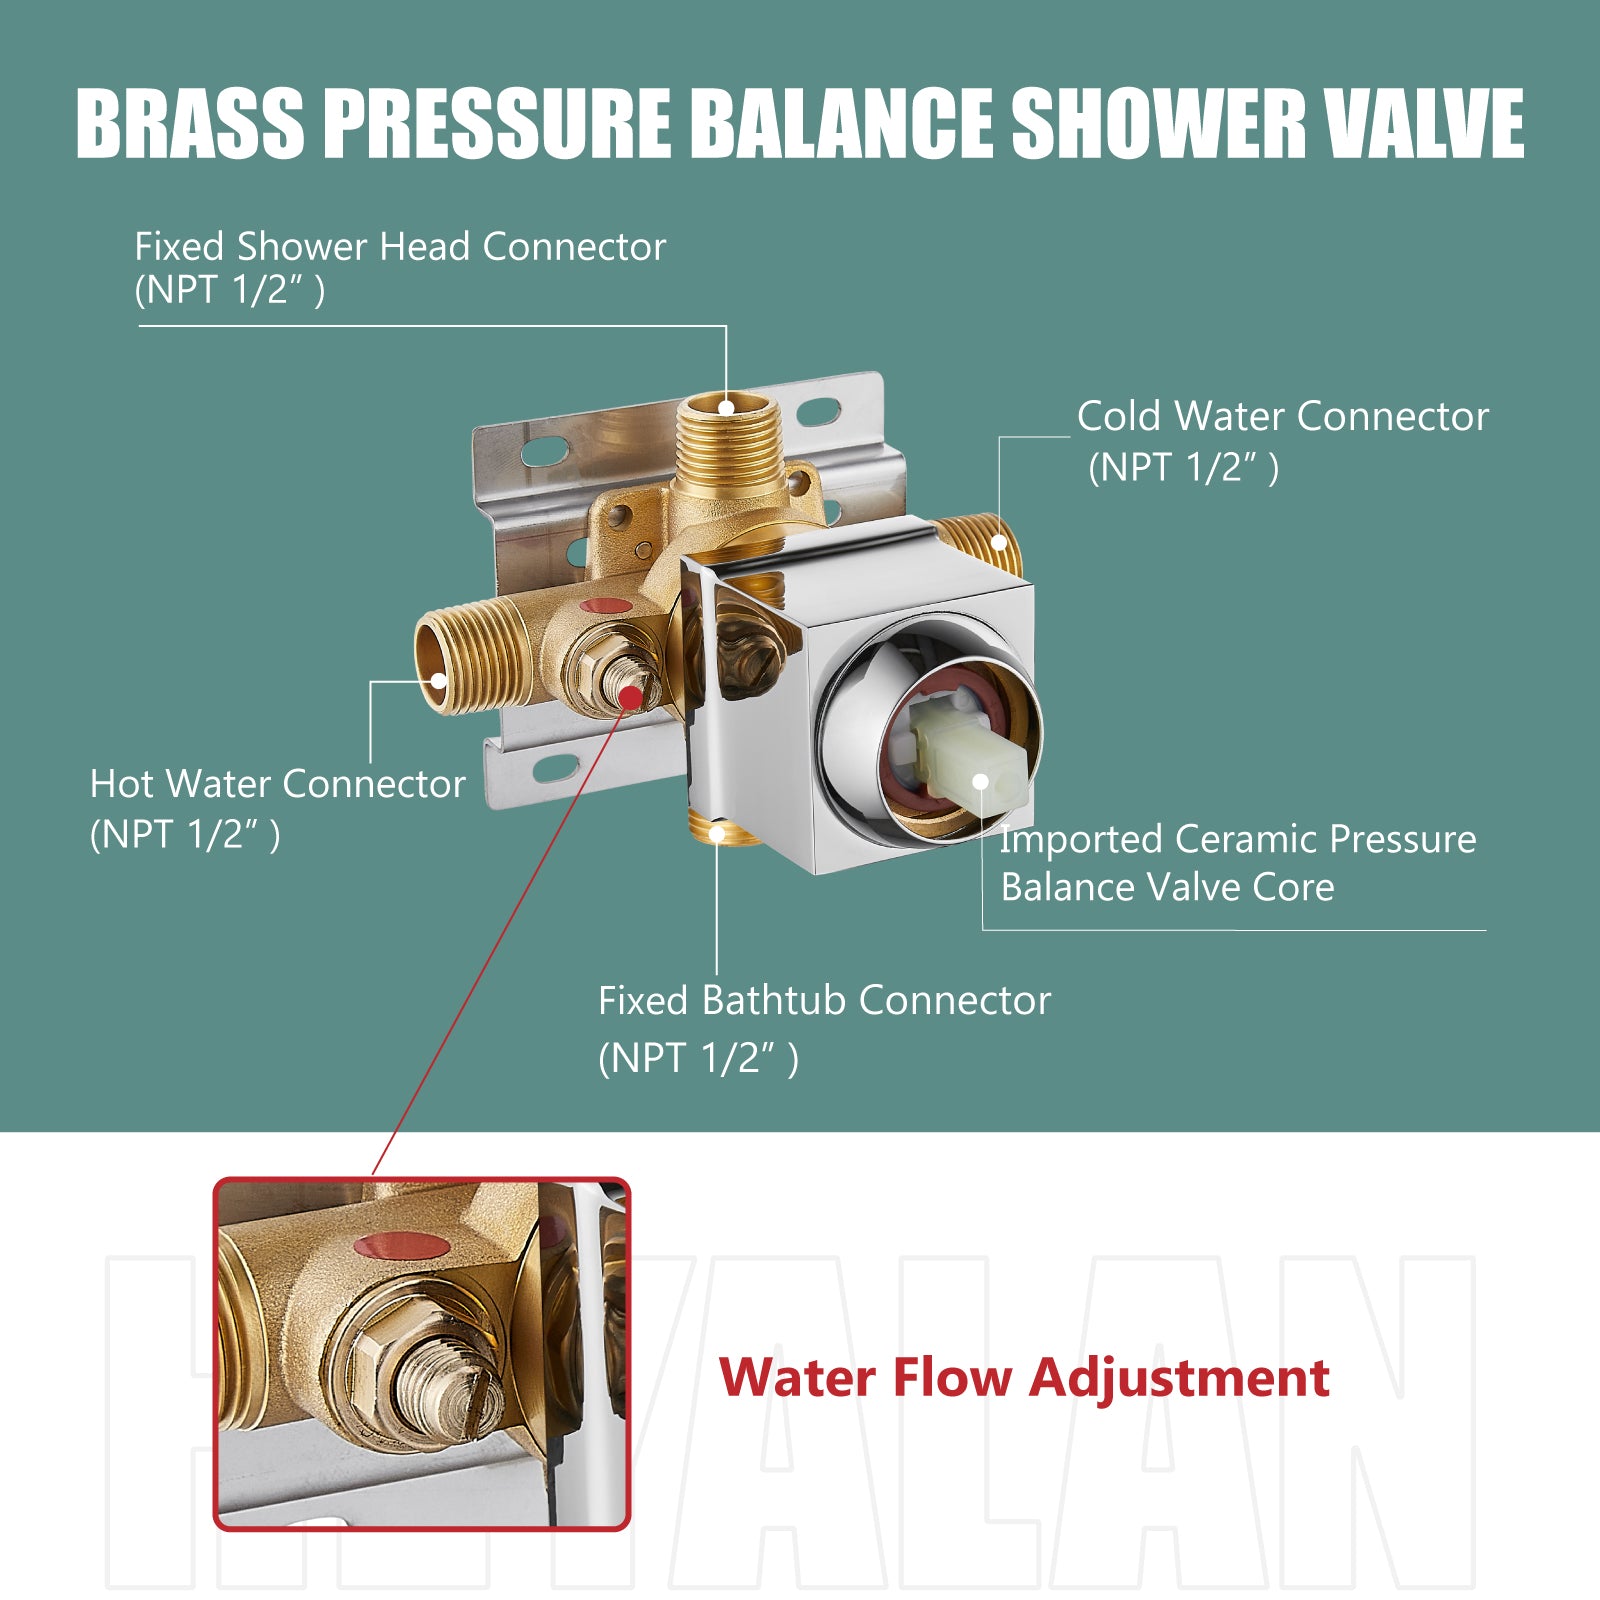 Heyalan  Shower Faucet Set with 6-Inch Square Showerhead 2 Function Shower Trim Kit with Solid Brass Male Thread Rough-in Valve Single-Handle Shower System with Tub Spout